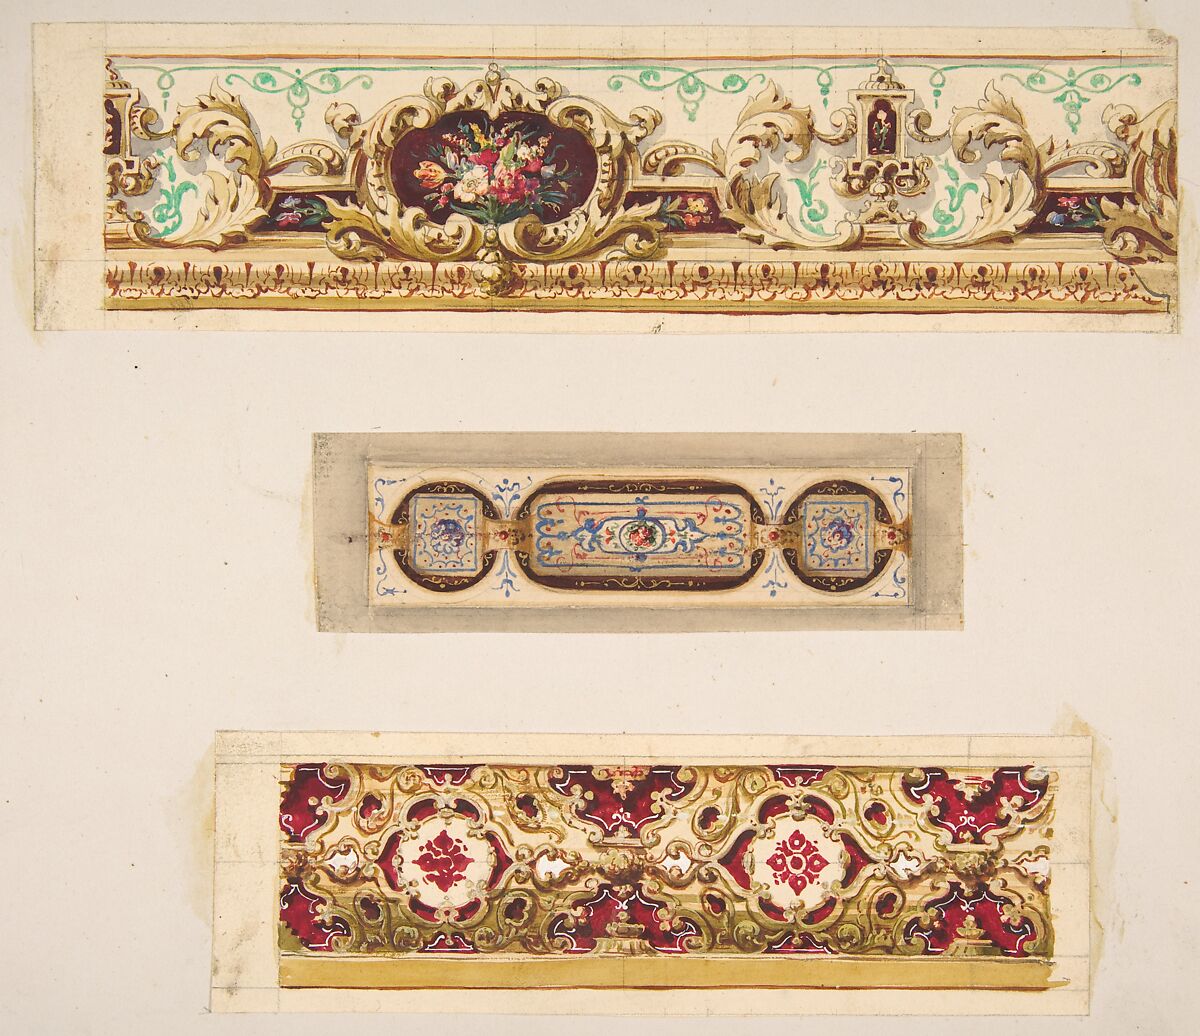 Three designs for painted borders to decorate a room, Jules-Edmond-Charles Lachaise (French, died 1897), graphite, pen and ink, watercolor on separate sheets glued to heavy wove paper 